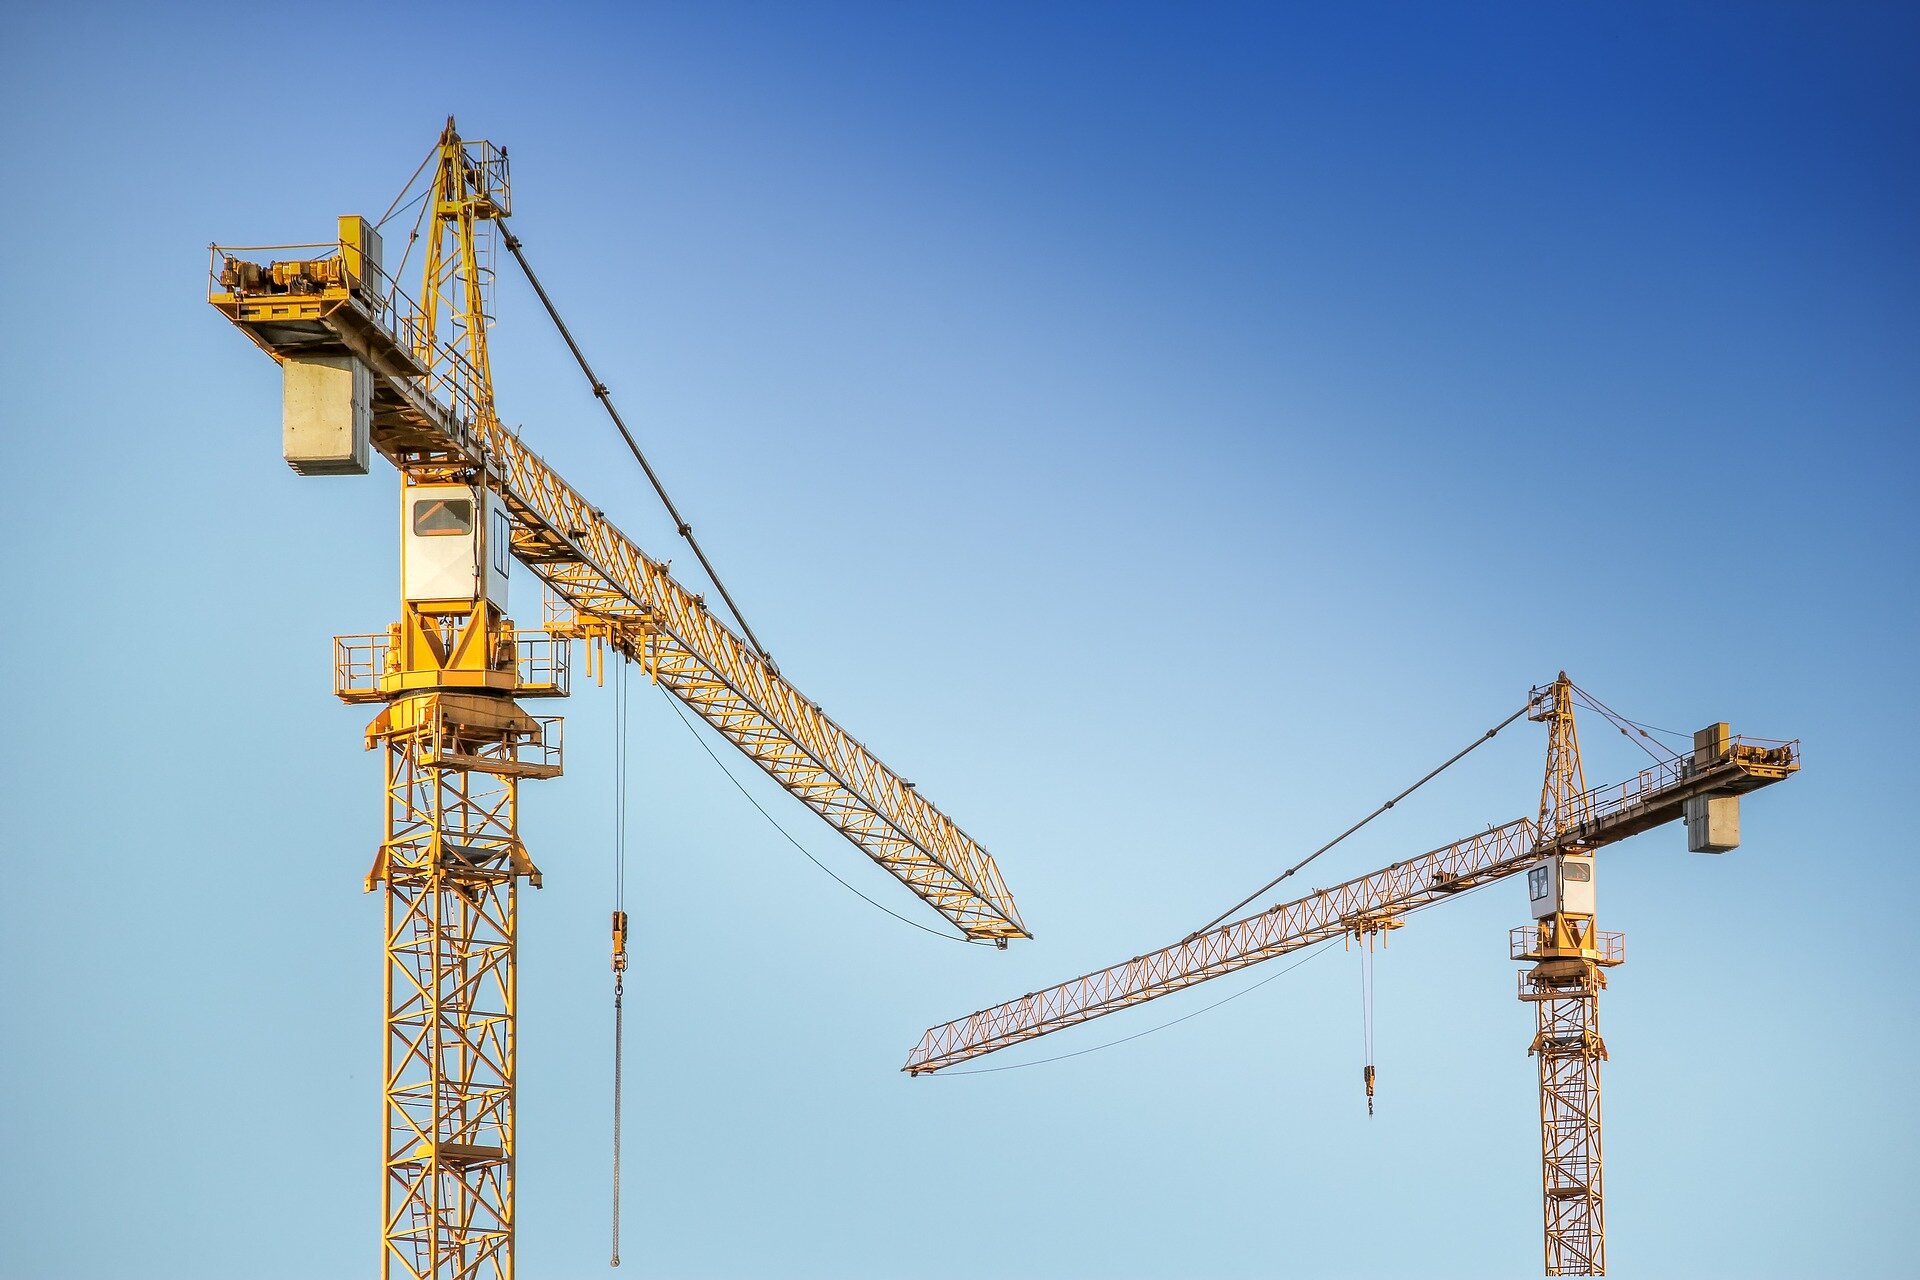 Researchers link cutting-edge gravity research to safer operation of construction cranes